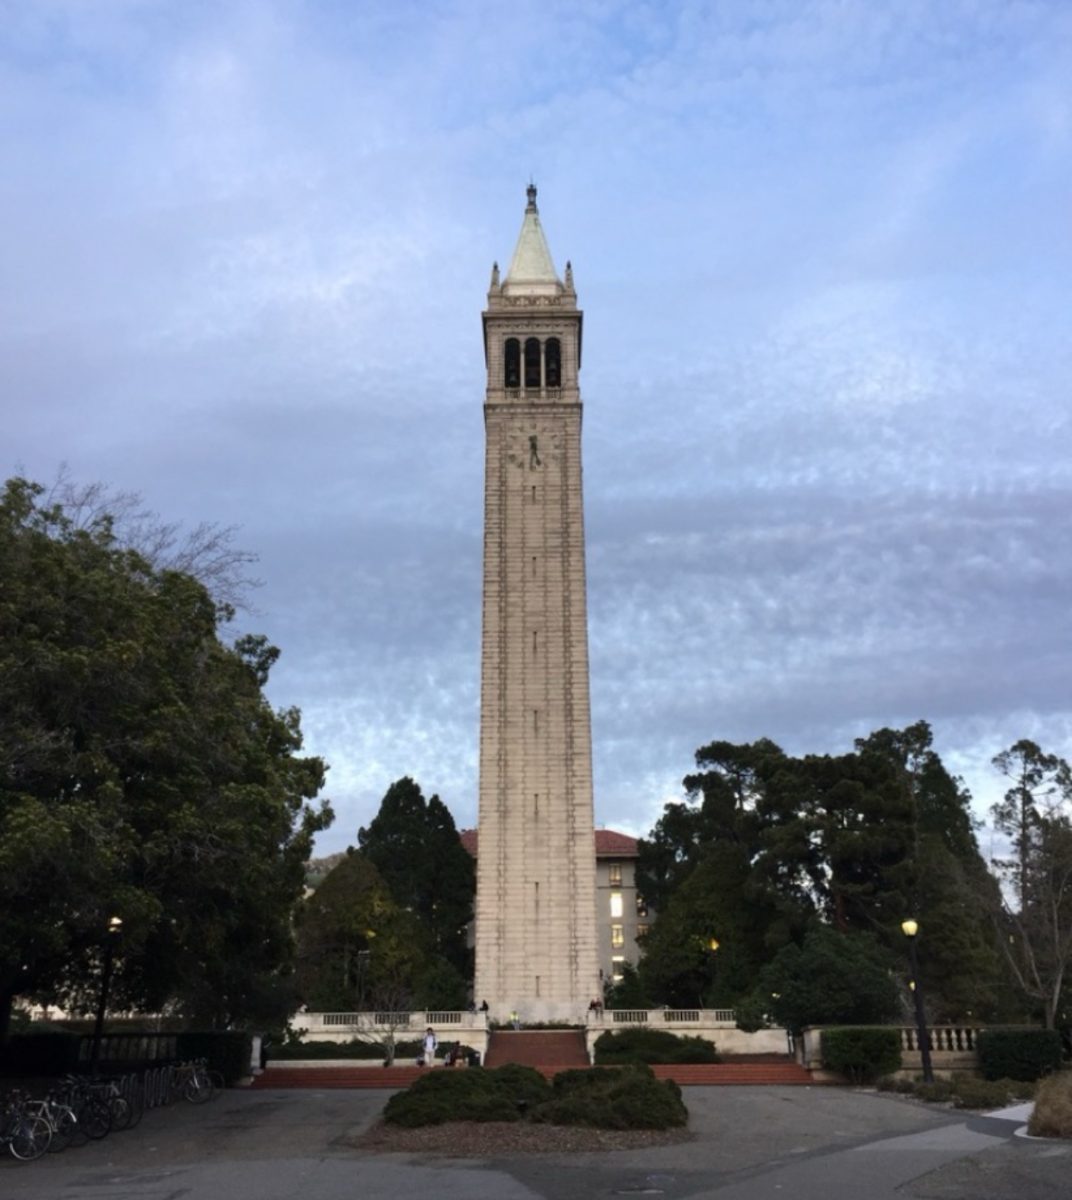 The+Sather+Tower%2C+also+known+as+the+Campanile%2C+at+UC+Berkeley.